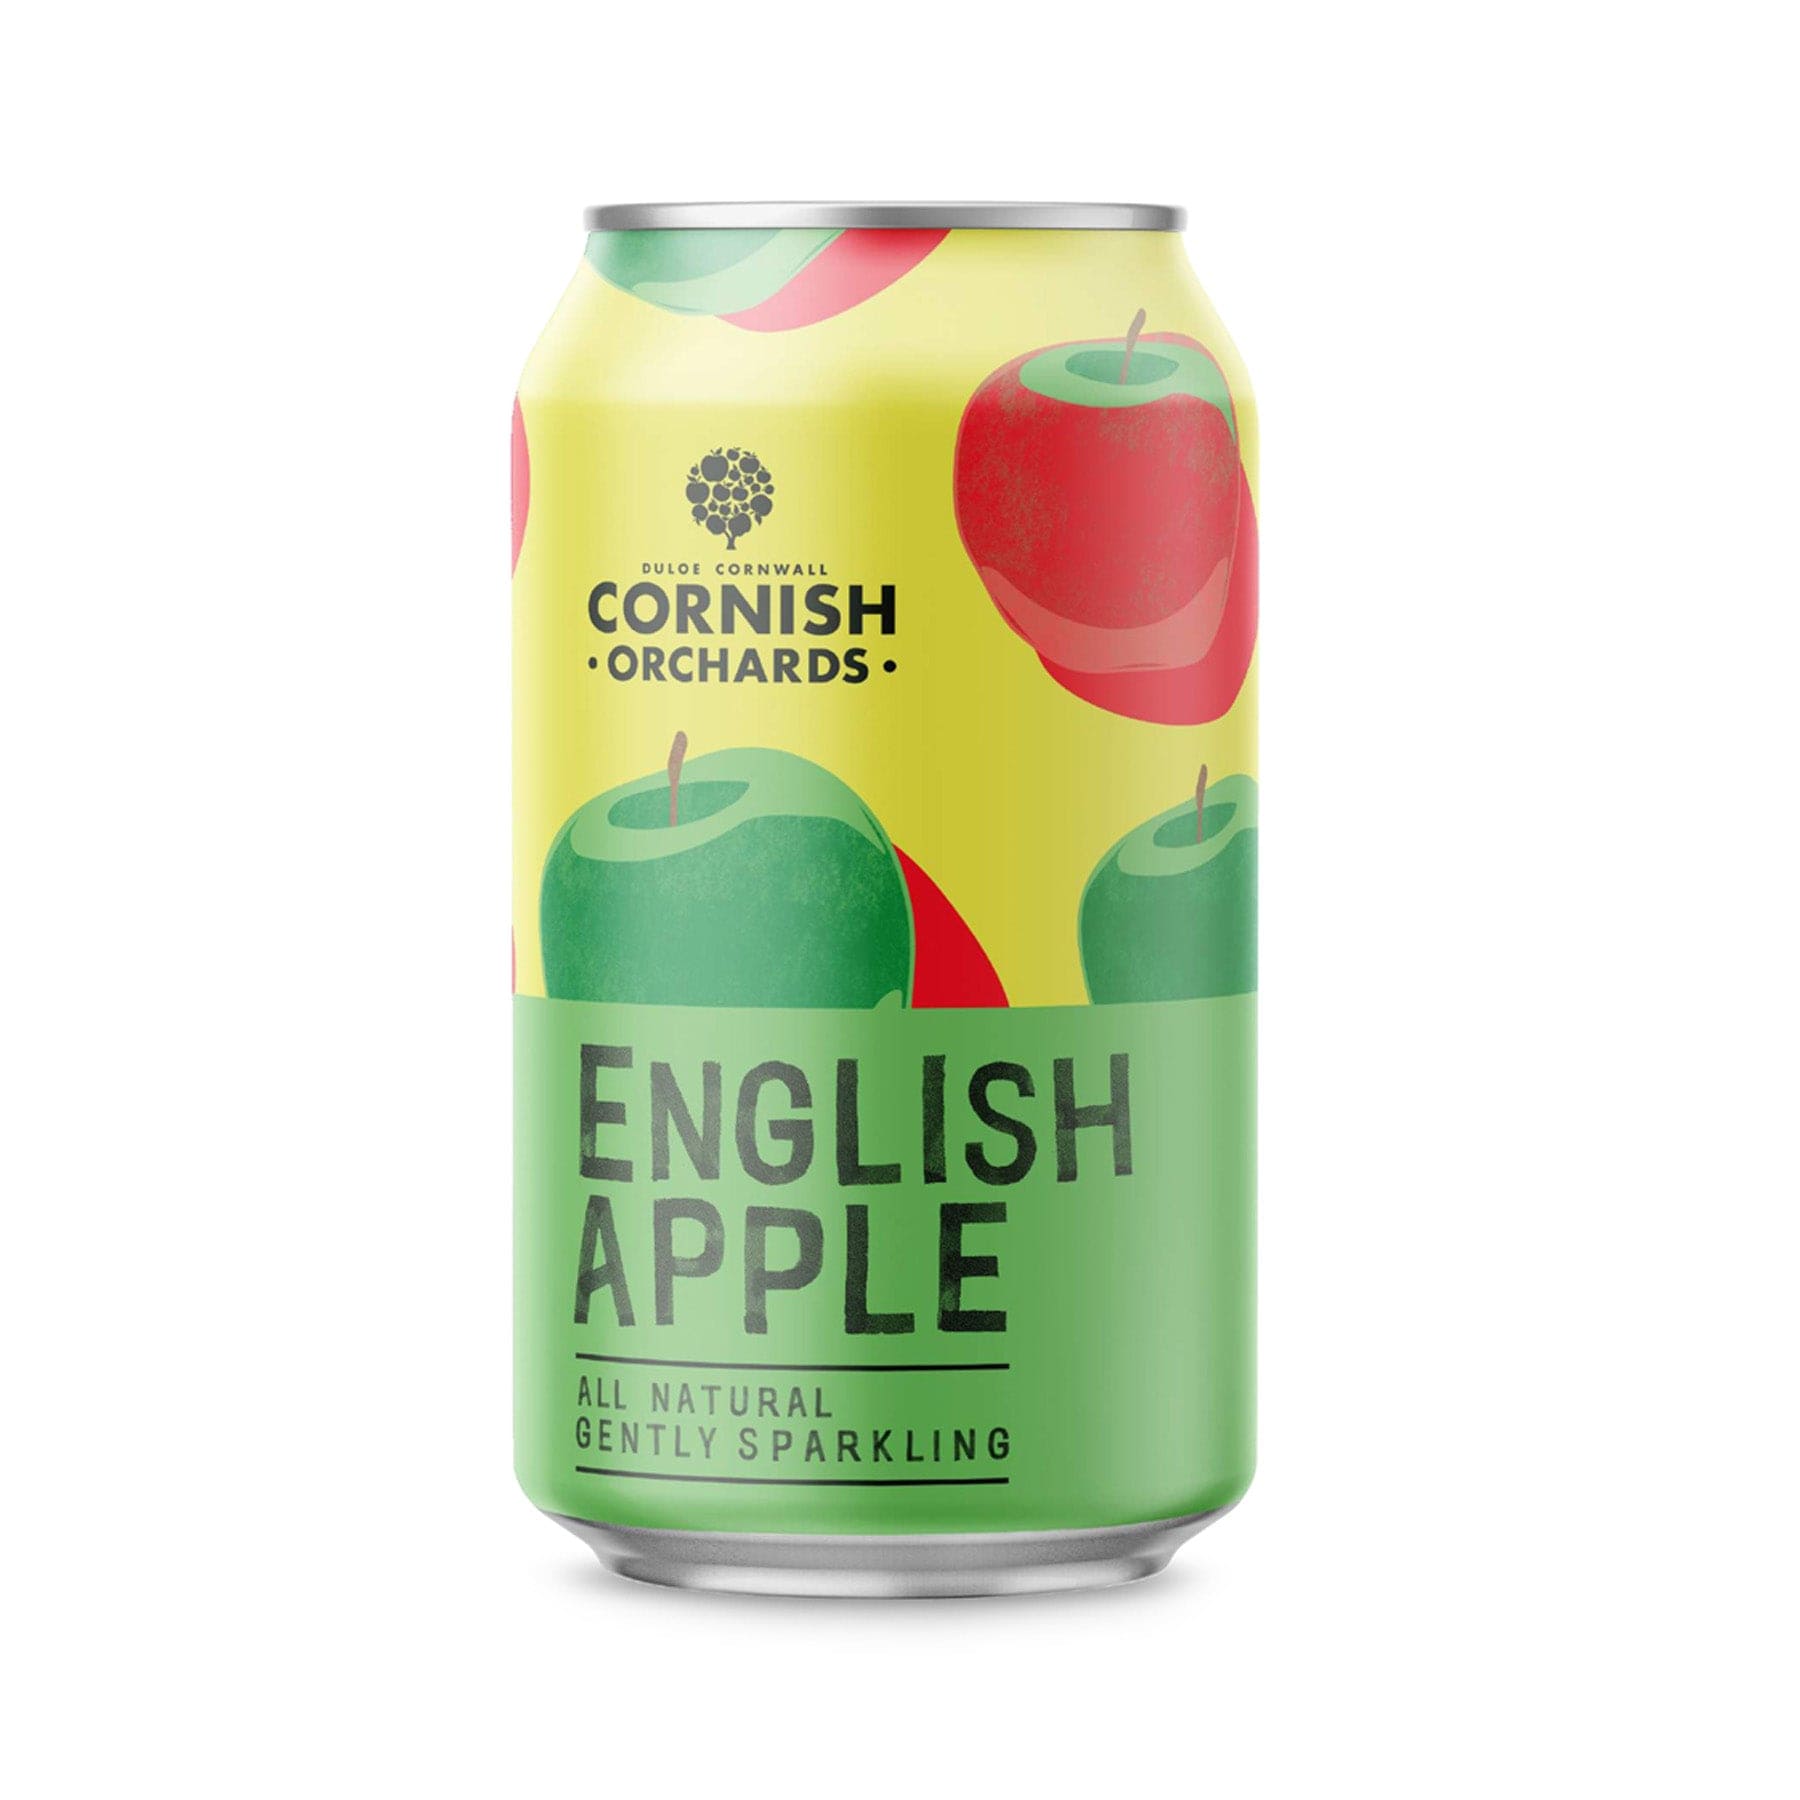 Cornish Orchards English Apple cider can, all natural gently sparkling beverage, red and green apples illustration, isolated on white background.